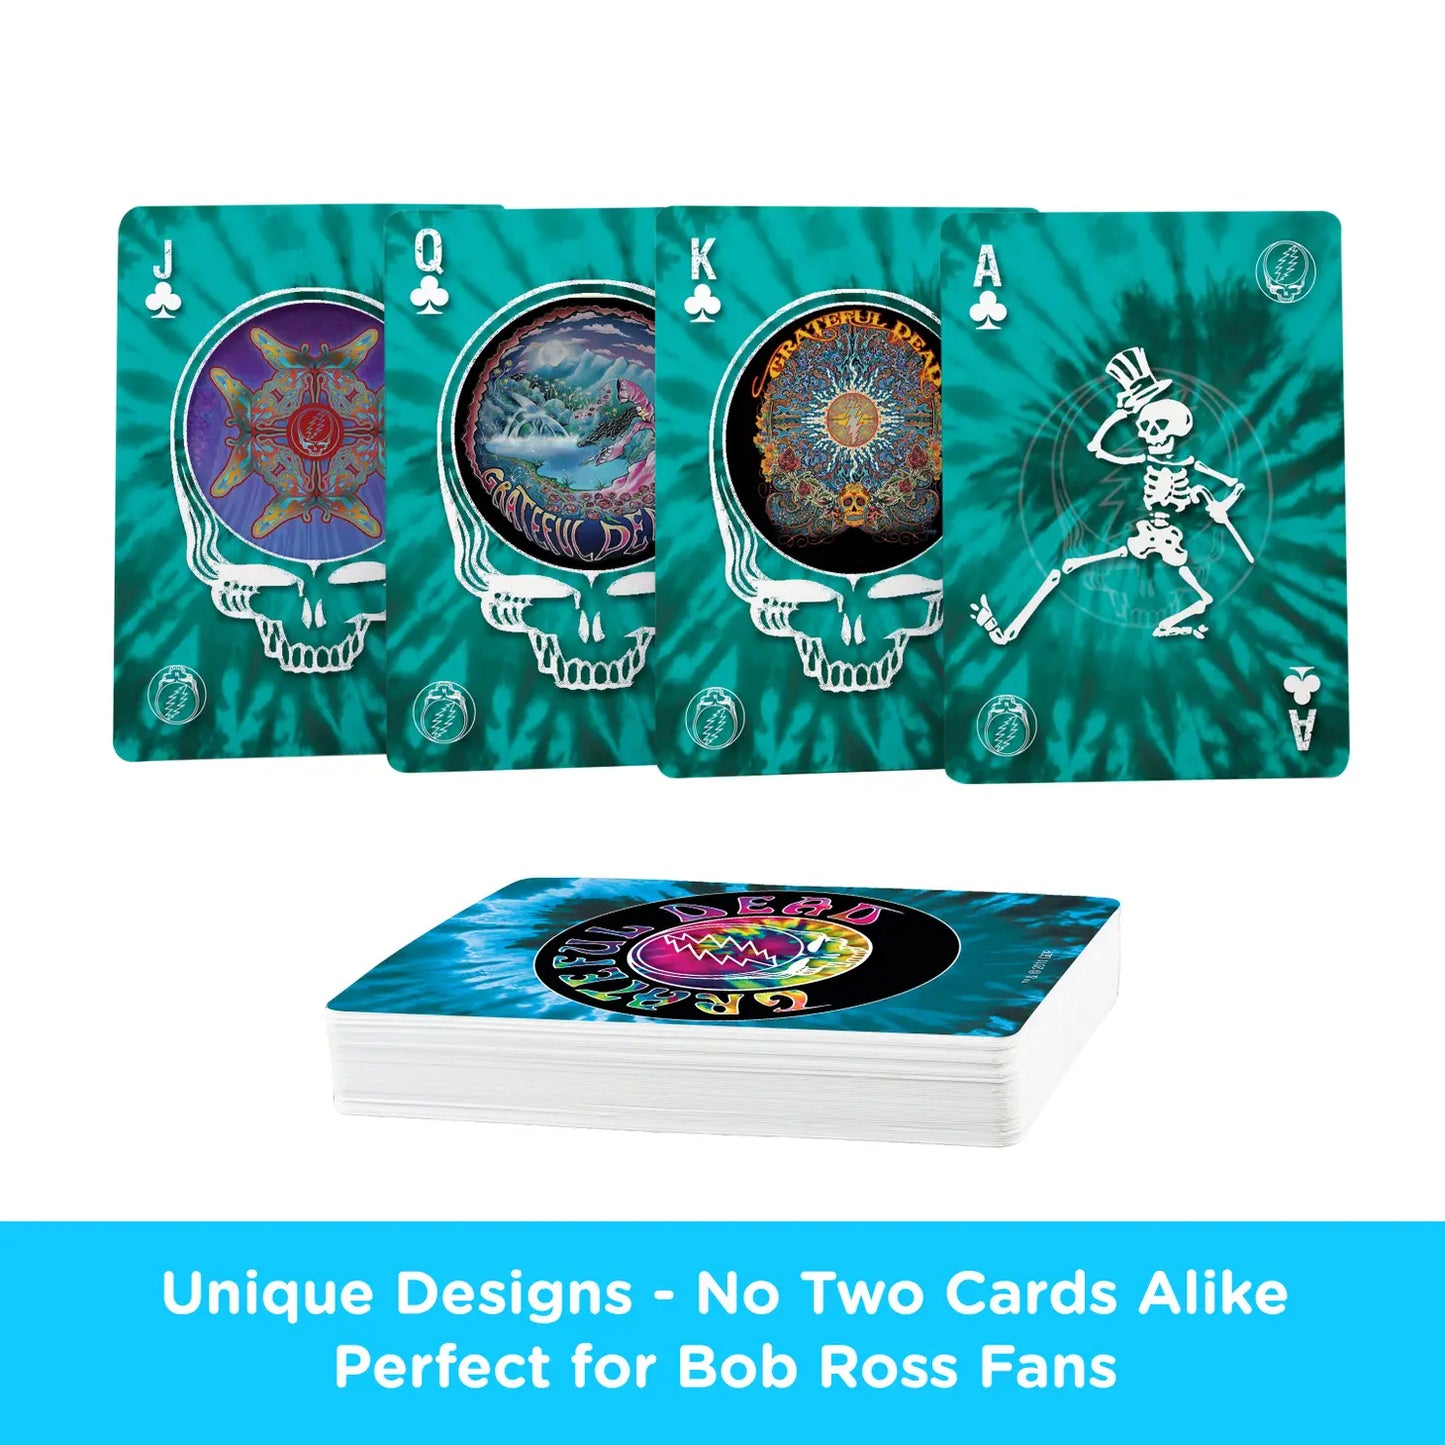 Grateful Dead Playing Cards by Aquarius - A Tribute to the Legendary Band